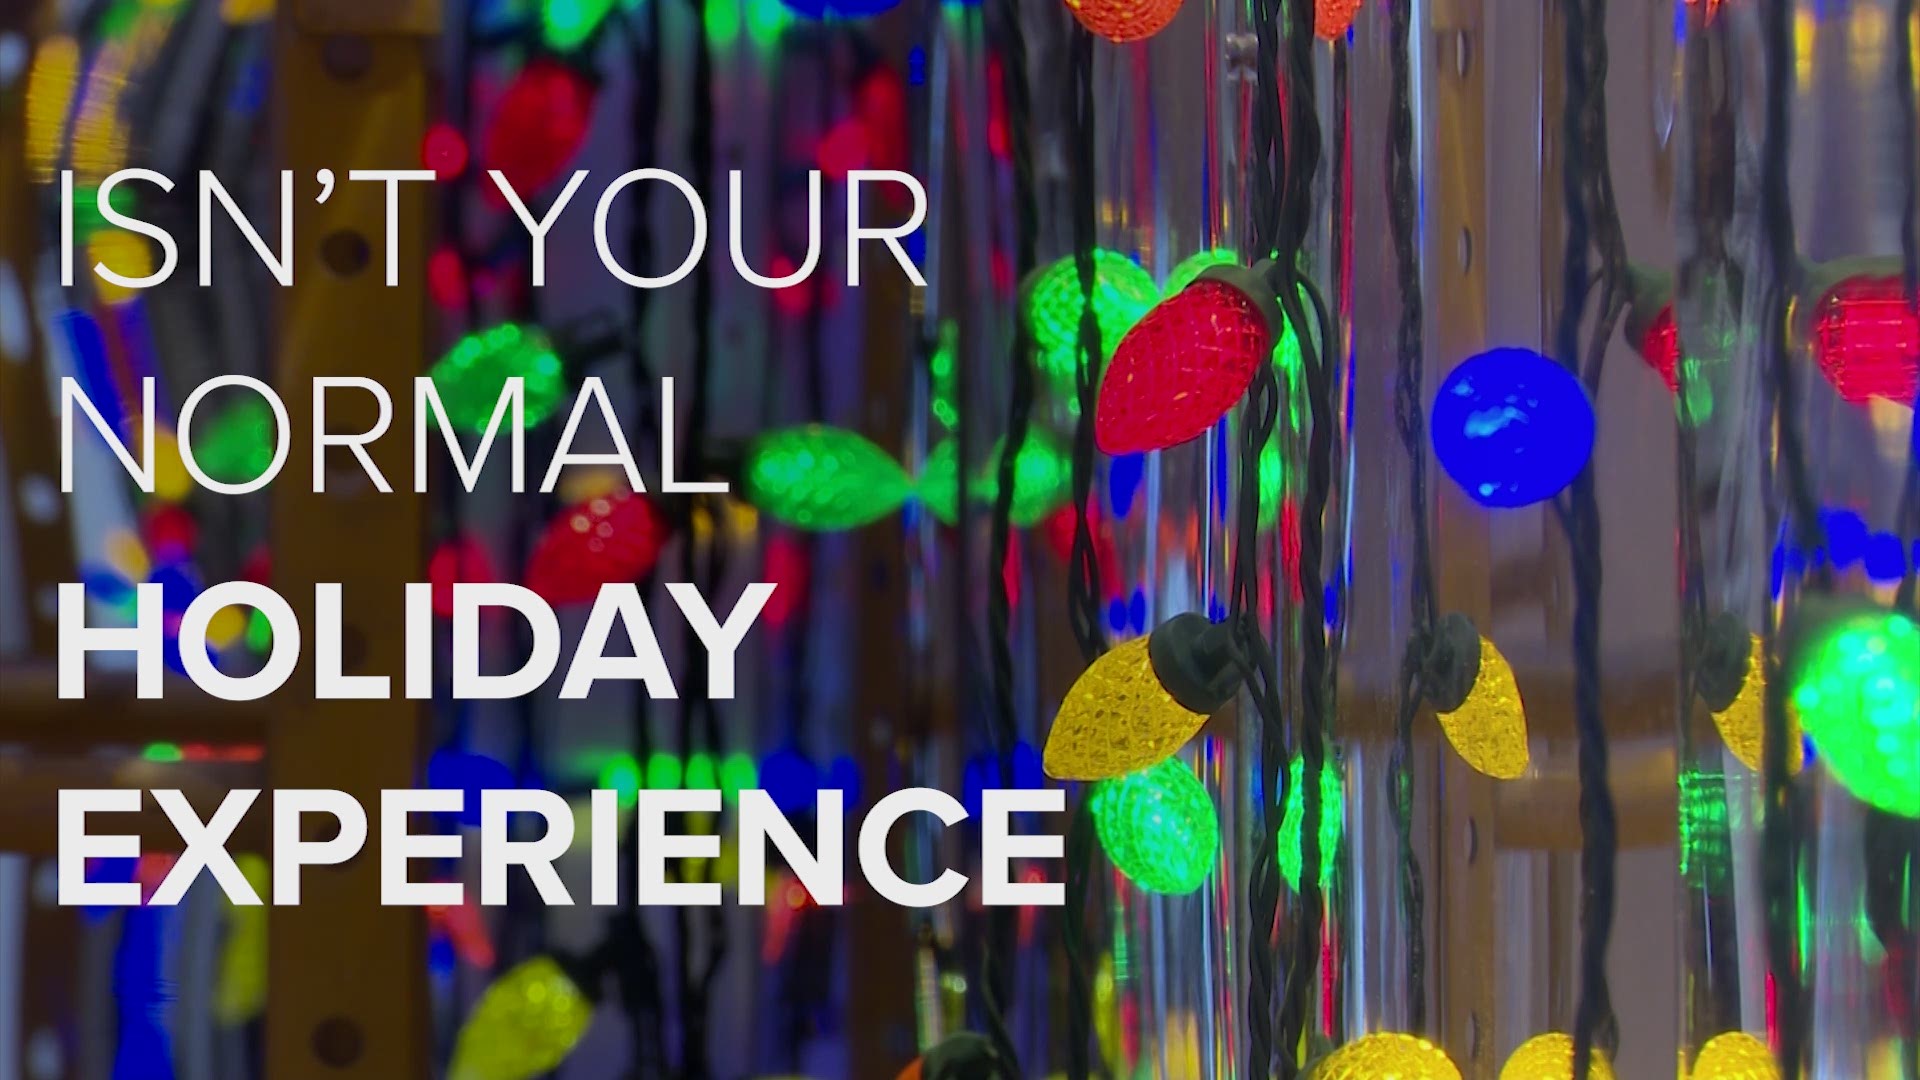 A photo booth company decided to change things up this holiday season by creating an interactive, walk-through experience to take photos like never before.